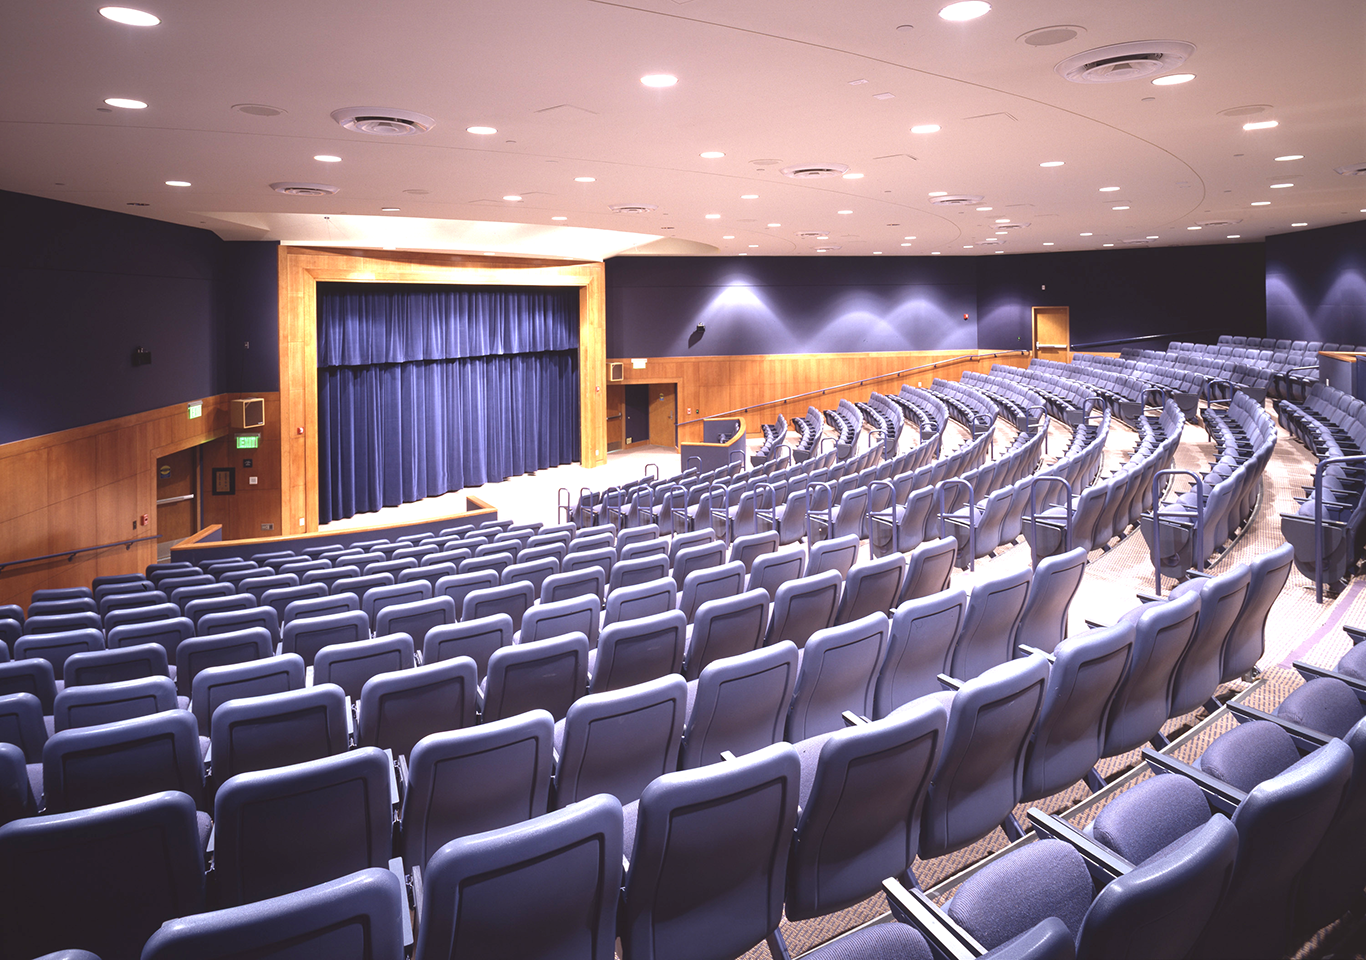 Lecture hall looking onto stage at University of California - Los Angeles